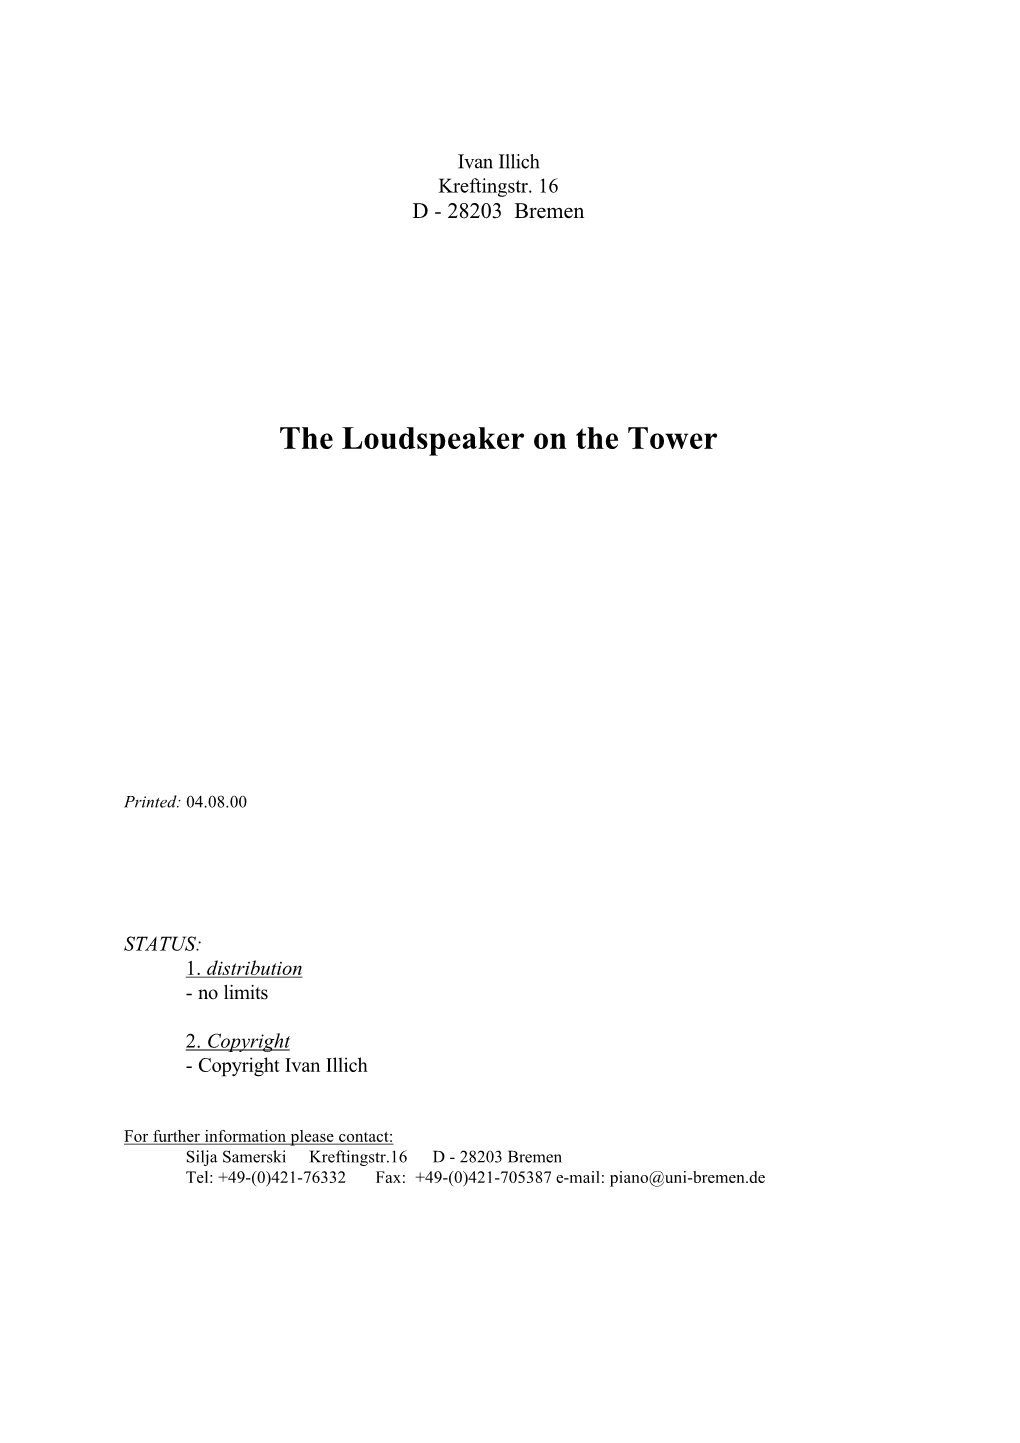 The Loudspeaker on the Tower (.Pdf)